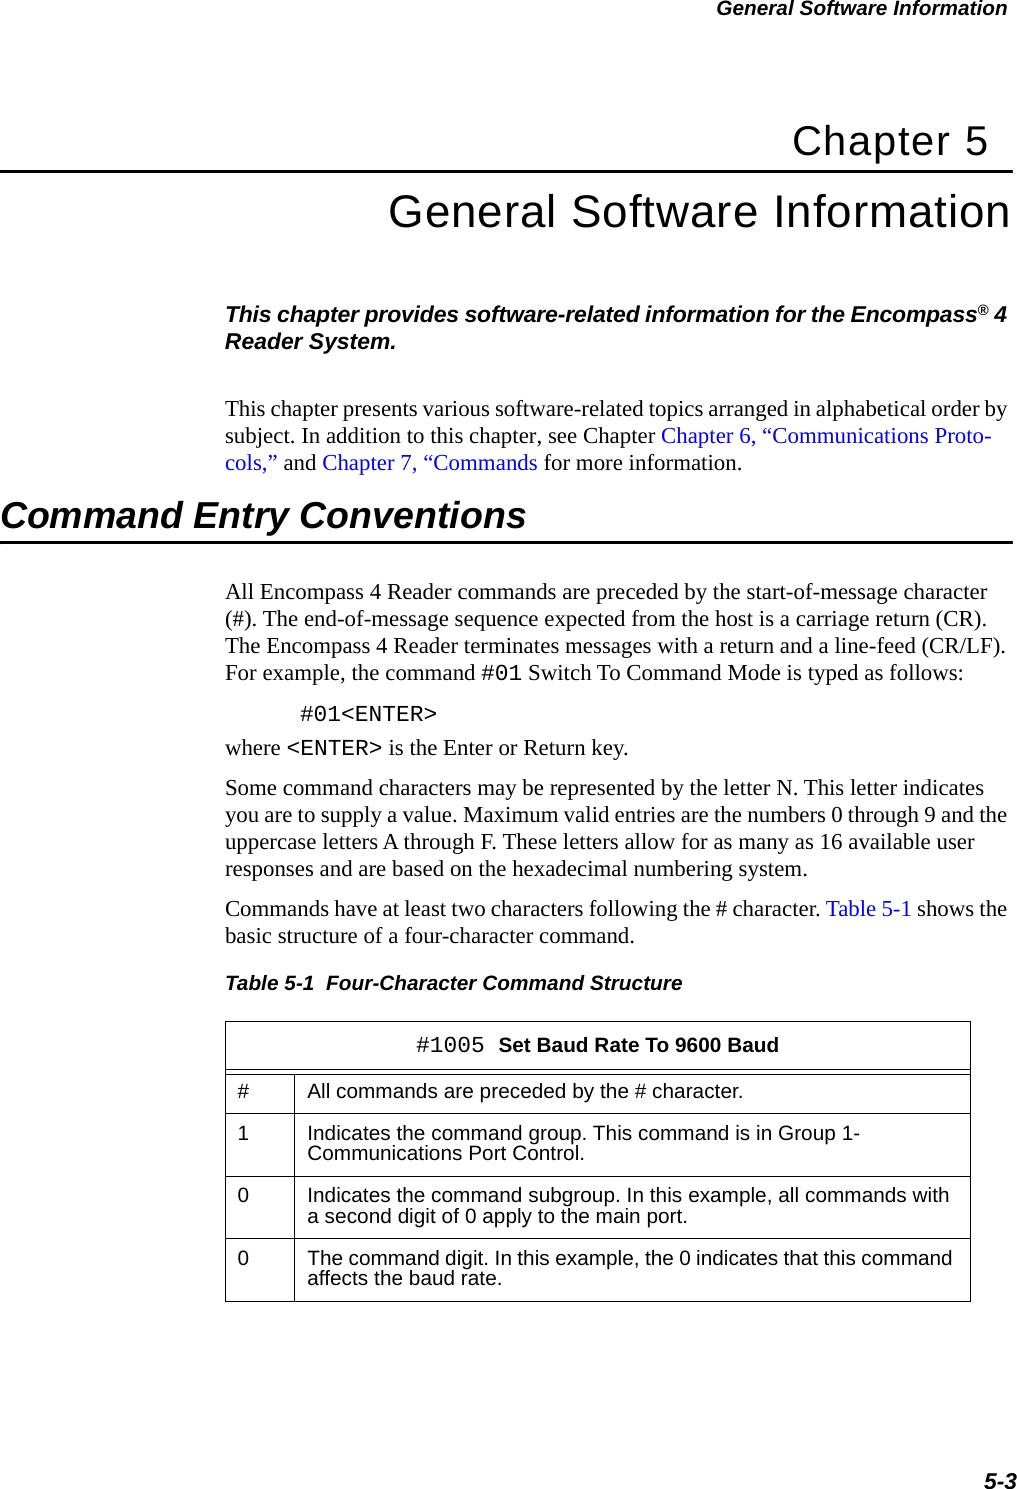 General Software Information5-3Chapter 5General Software InformationThis chapter provides software-related information for the Encompass® 4 Reader System. This chapter presents various software-related topics arranged in alphabetical order by subject. In addition to this chapter, see Chapter Chapter 6, “Communications Proto-cols,” and Chapter 7, “Commands for more information.Command Entry ConventionsAll Encompass 4 Reader commands are preceded by the start-of-message character (#). The end-of-message sequence expected from the host is a carriage return (CR). The Encompass 4 Reader terminates messages with a return and a line-feed (CR/LF). For example, the command #01 Switch To Command Mode is typed as follows:#01&lt;ENTER&gt;where &lt;ENTER&gt; is the Enter or Return key.Some command characters may be represented by the letter N. This letter indicates you are to supply a value. Maximum valid entries are the numbers 0 through 9 and the uppercase letters A through F. These letters allow for as many as 16 available user responses and are based on the hexadecimal numbering system. Commands have at least two characters following the # character. Table 5-1 shows the basic structure of a four-character command.Table 5-1  Four-Character Command Structure #1005 Set Baud Rate To 9600 Baud#All commands are preceded by the # character.1Indicates the command group. This command is in Group 1- Communications Port Control.0Indicates the command subgroup. In this example, all commands with a second digit of 0 apply to the main port.0The command digit. In this example, the 0 indicates that this command affects the baud rate.